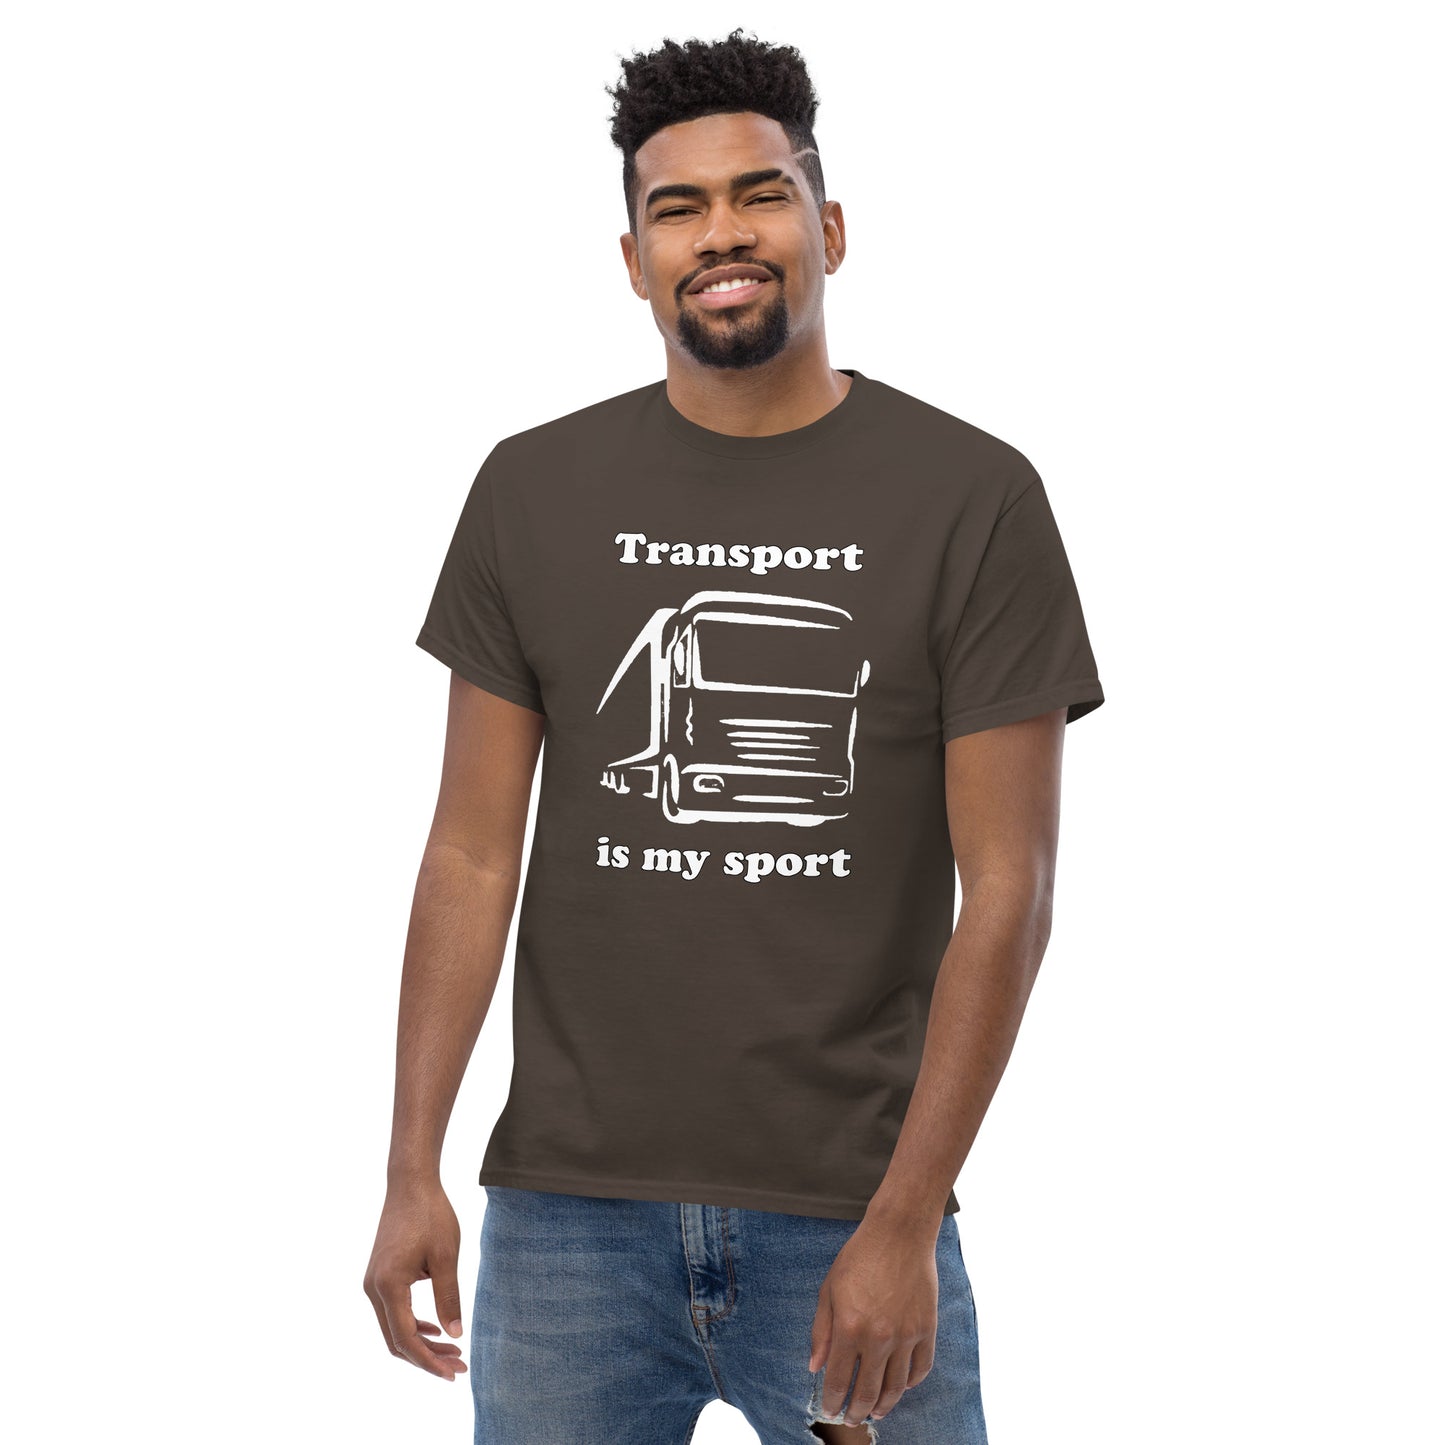 Man with brown t-shirt with picture of truck and text "Transport is my sport"